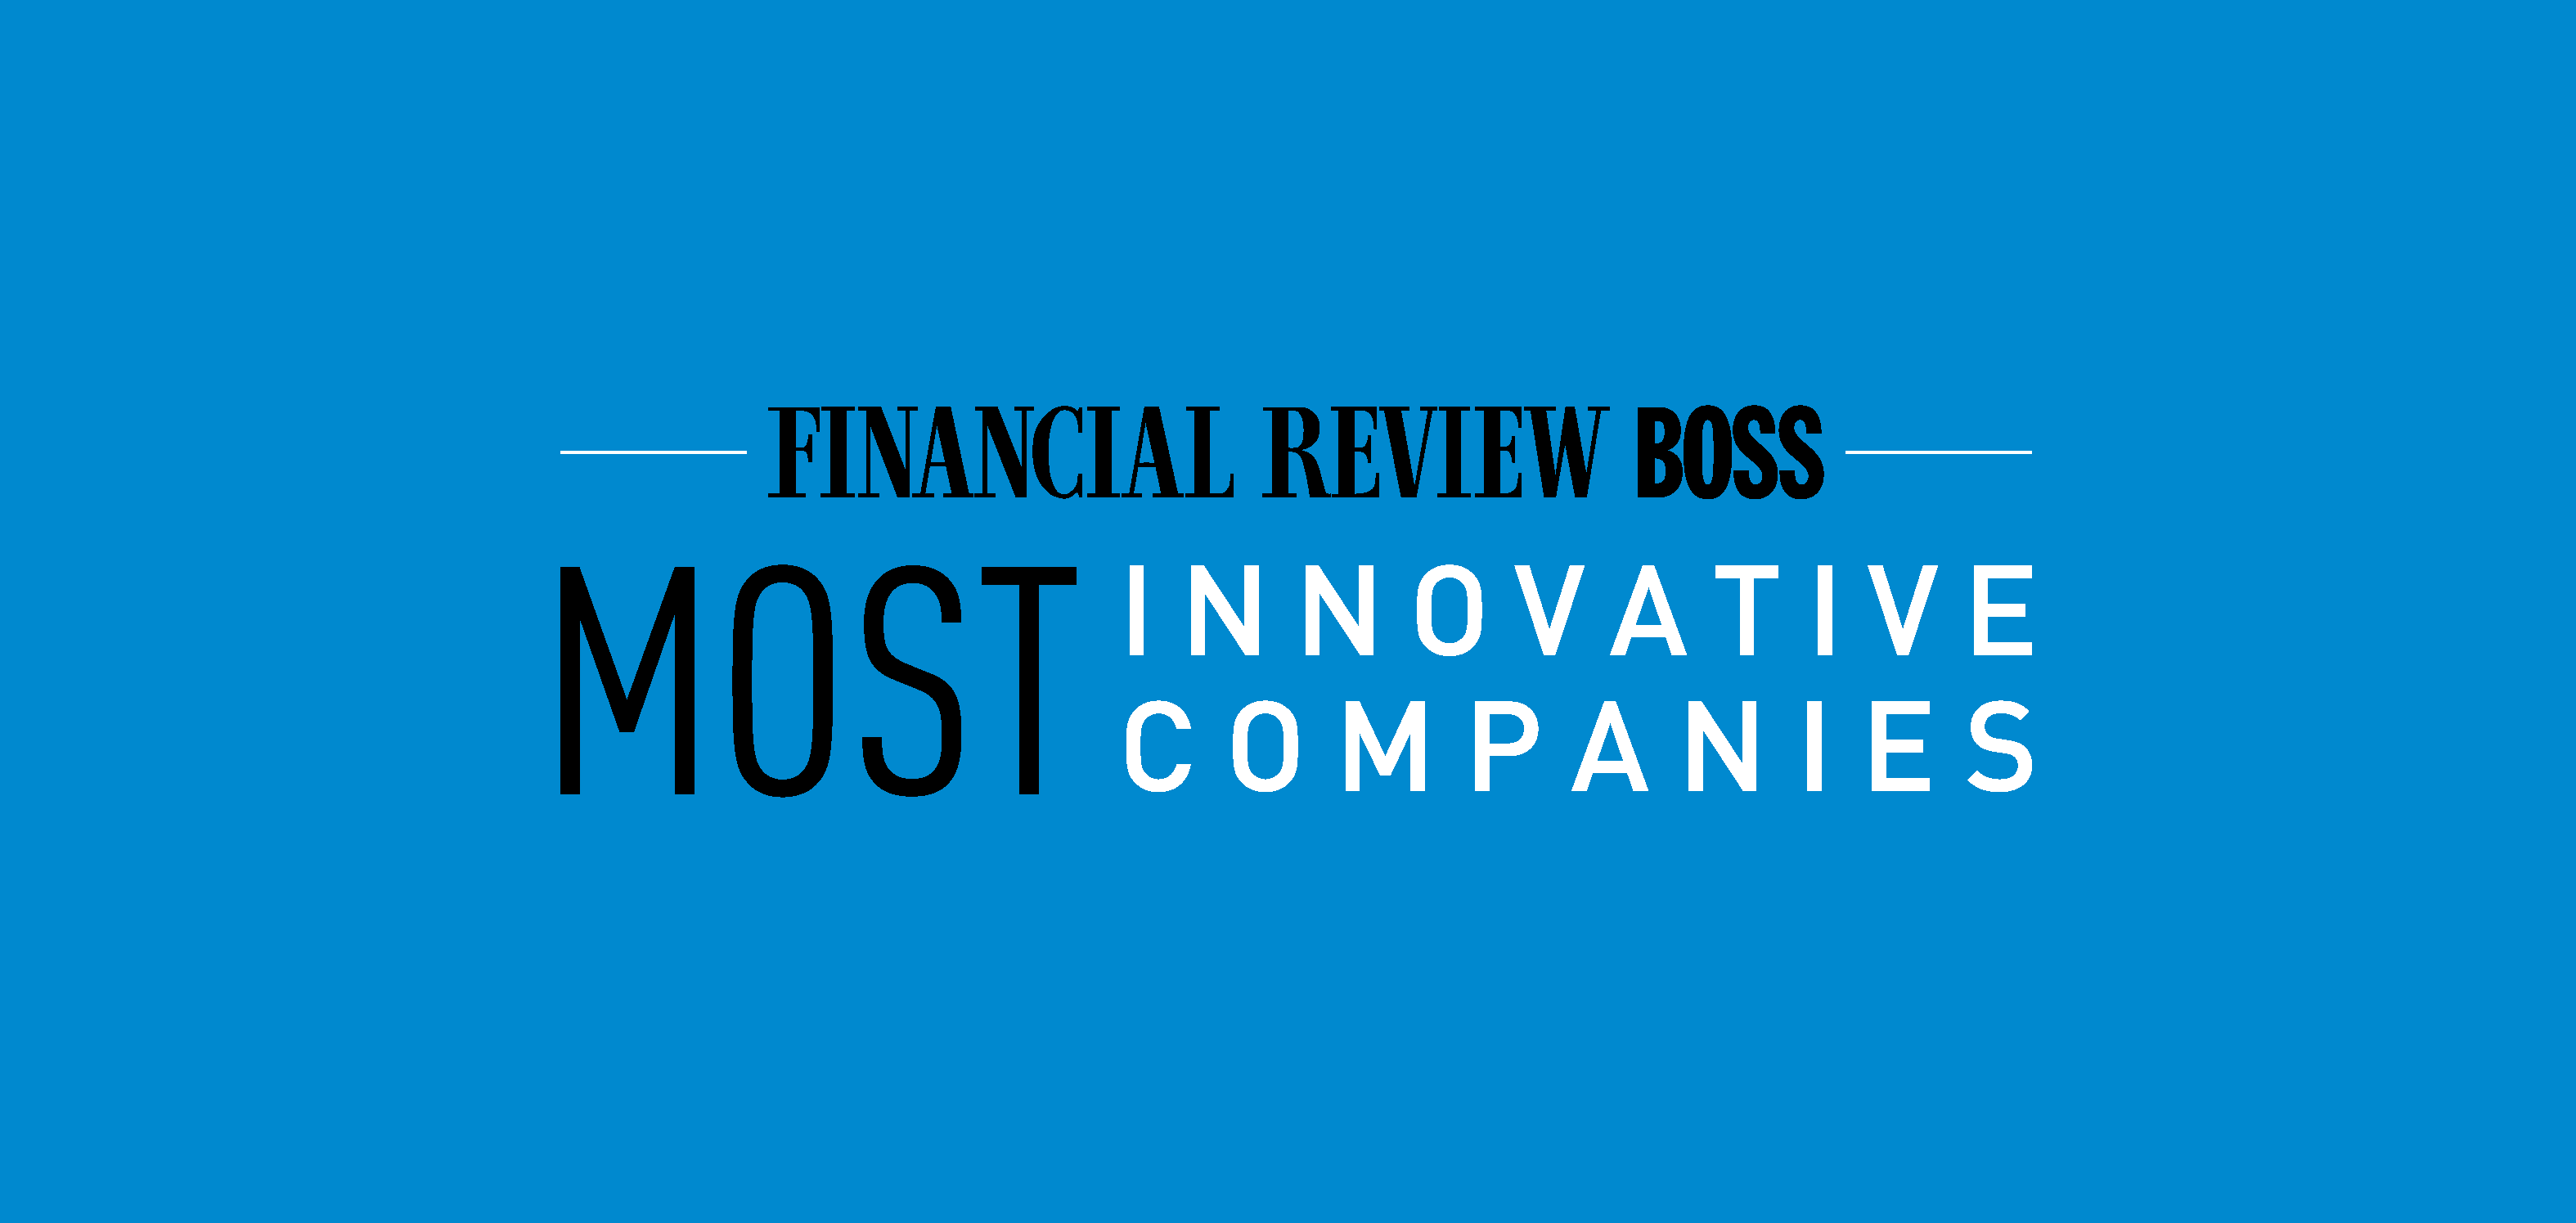 Fandelo shortlisted for AFR BOSS Most Innovative Companies